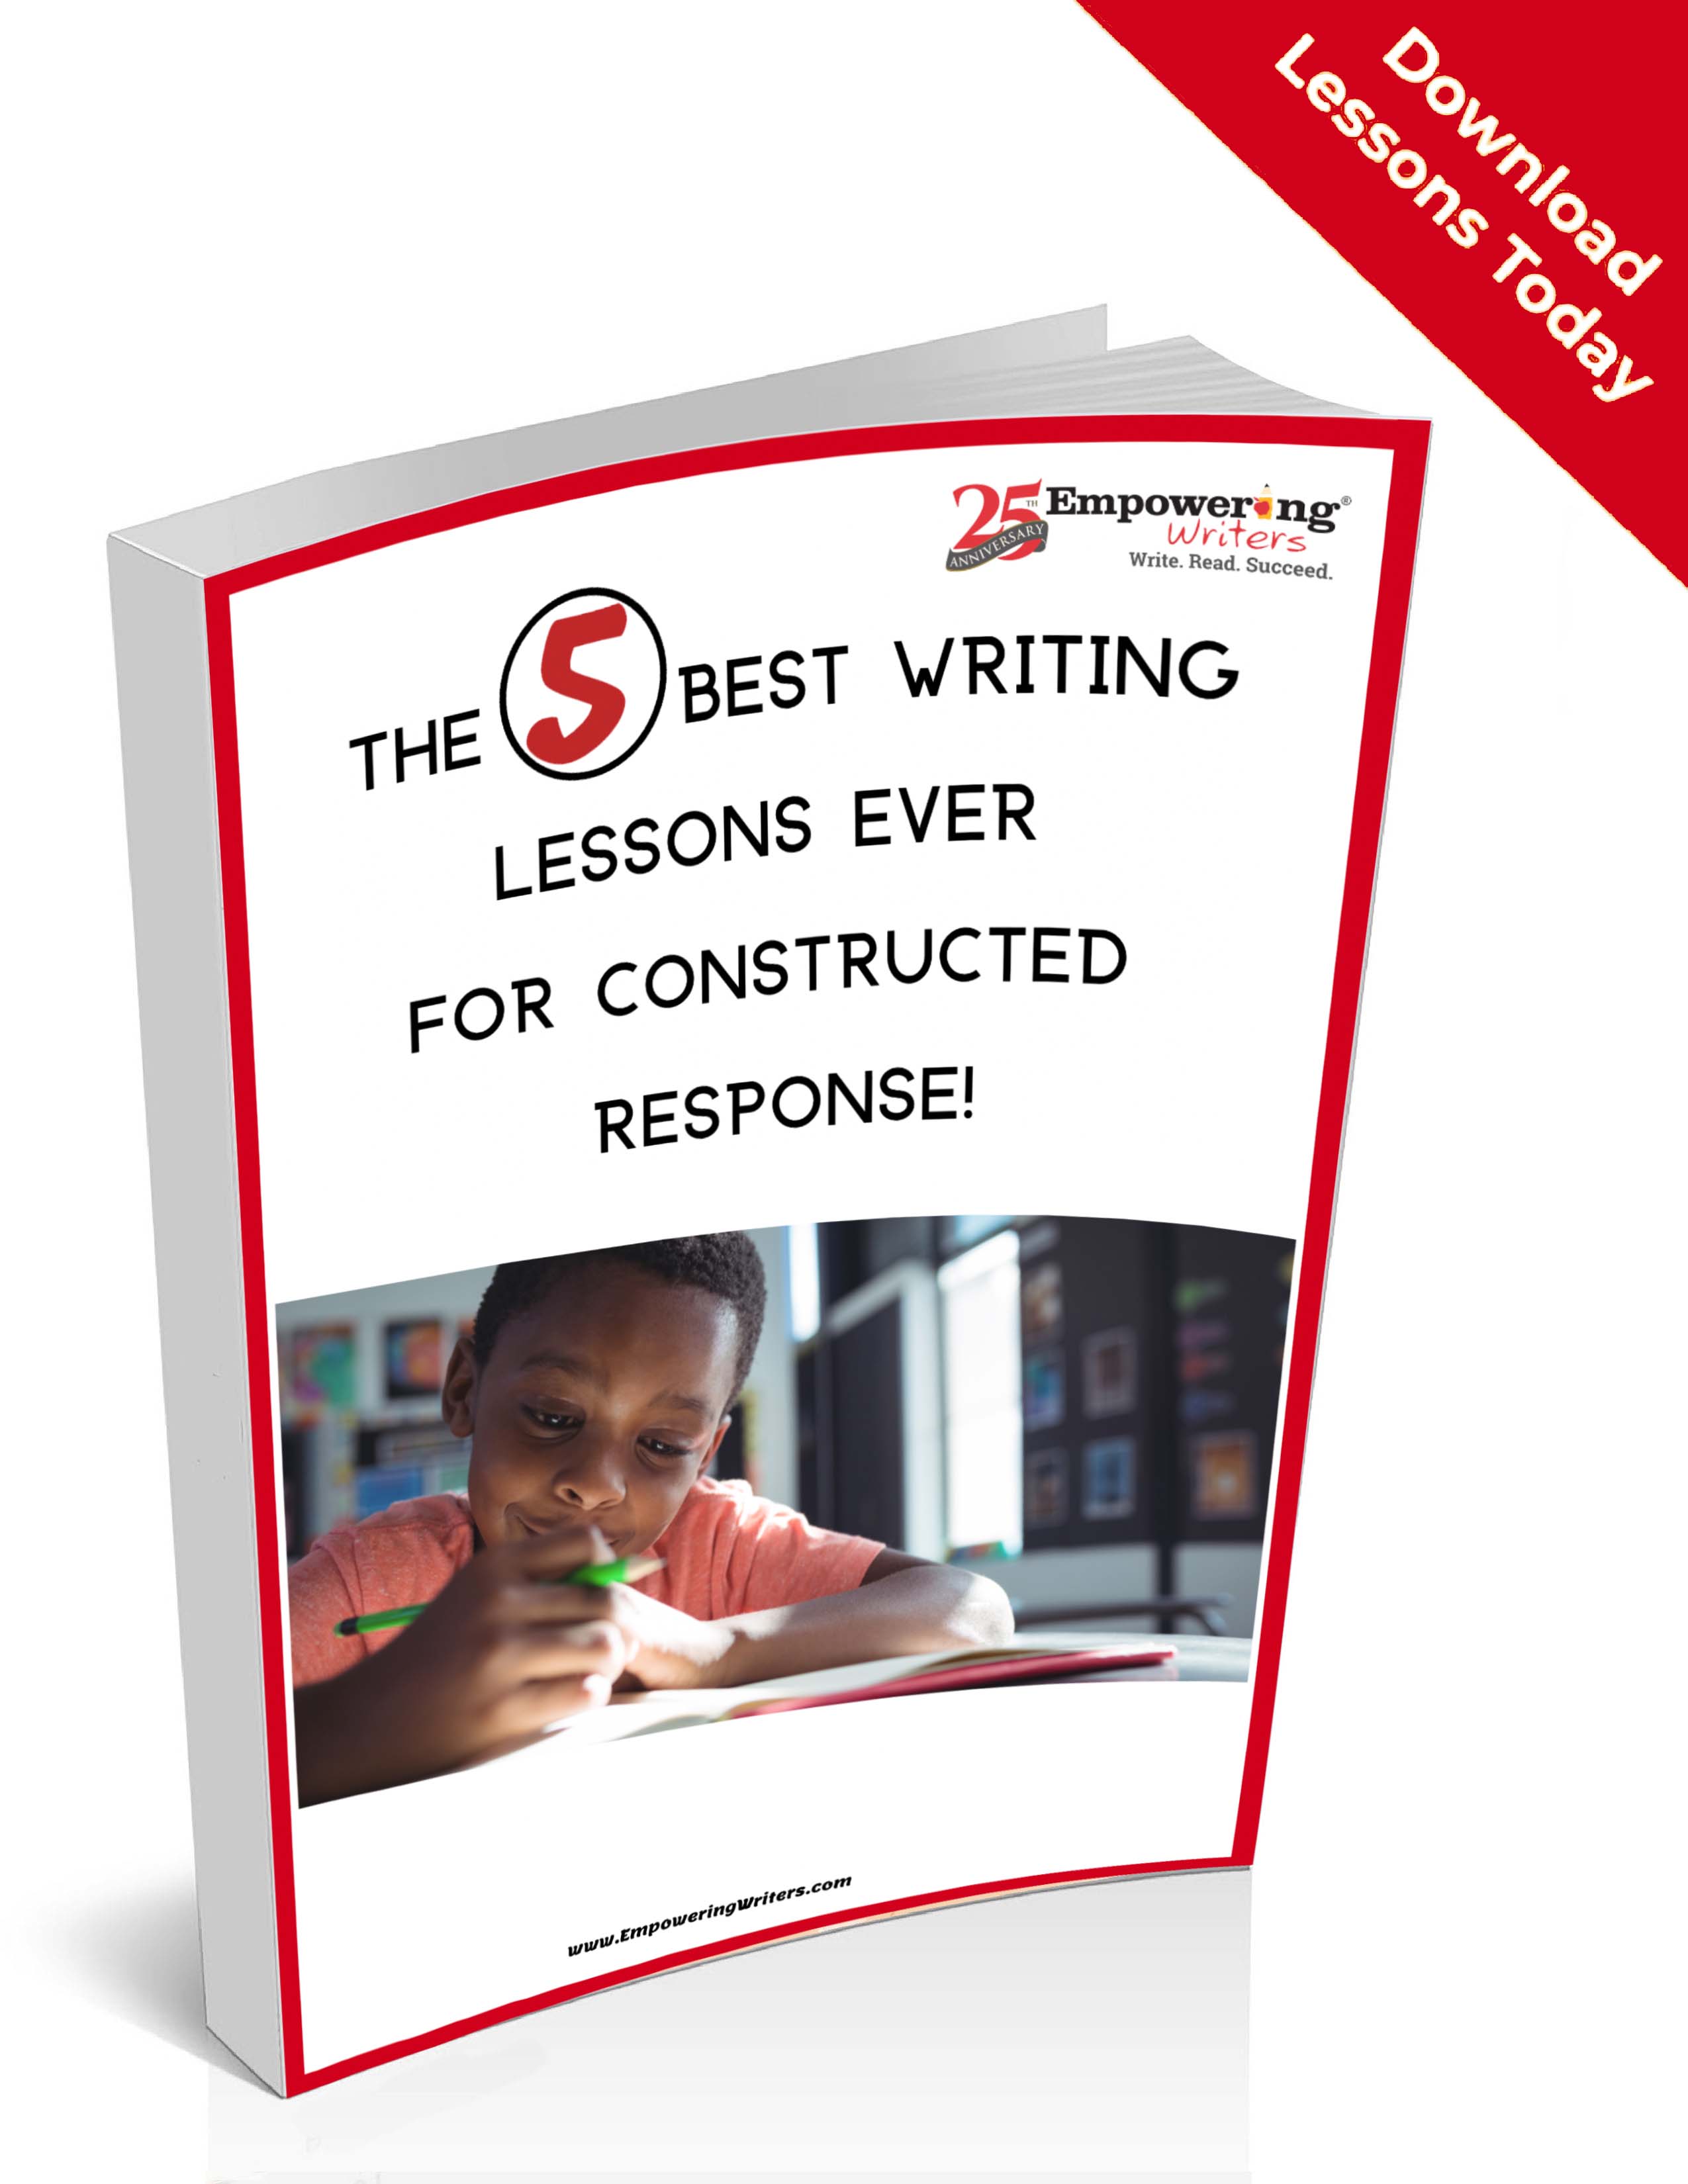 The 5 Best Writing Lessons copy